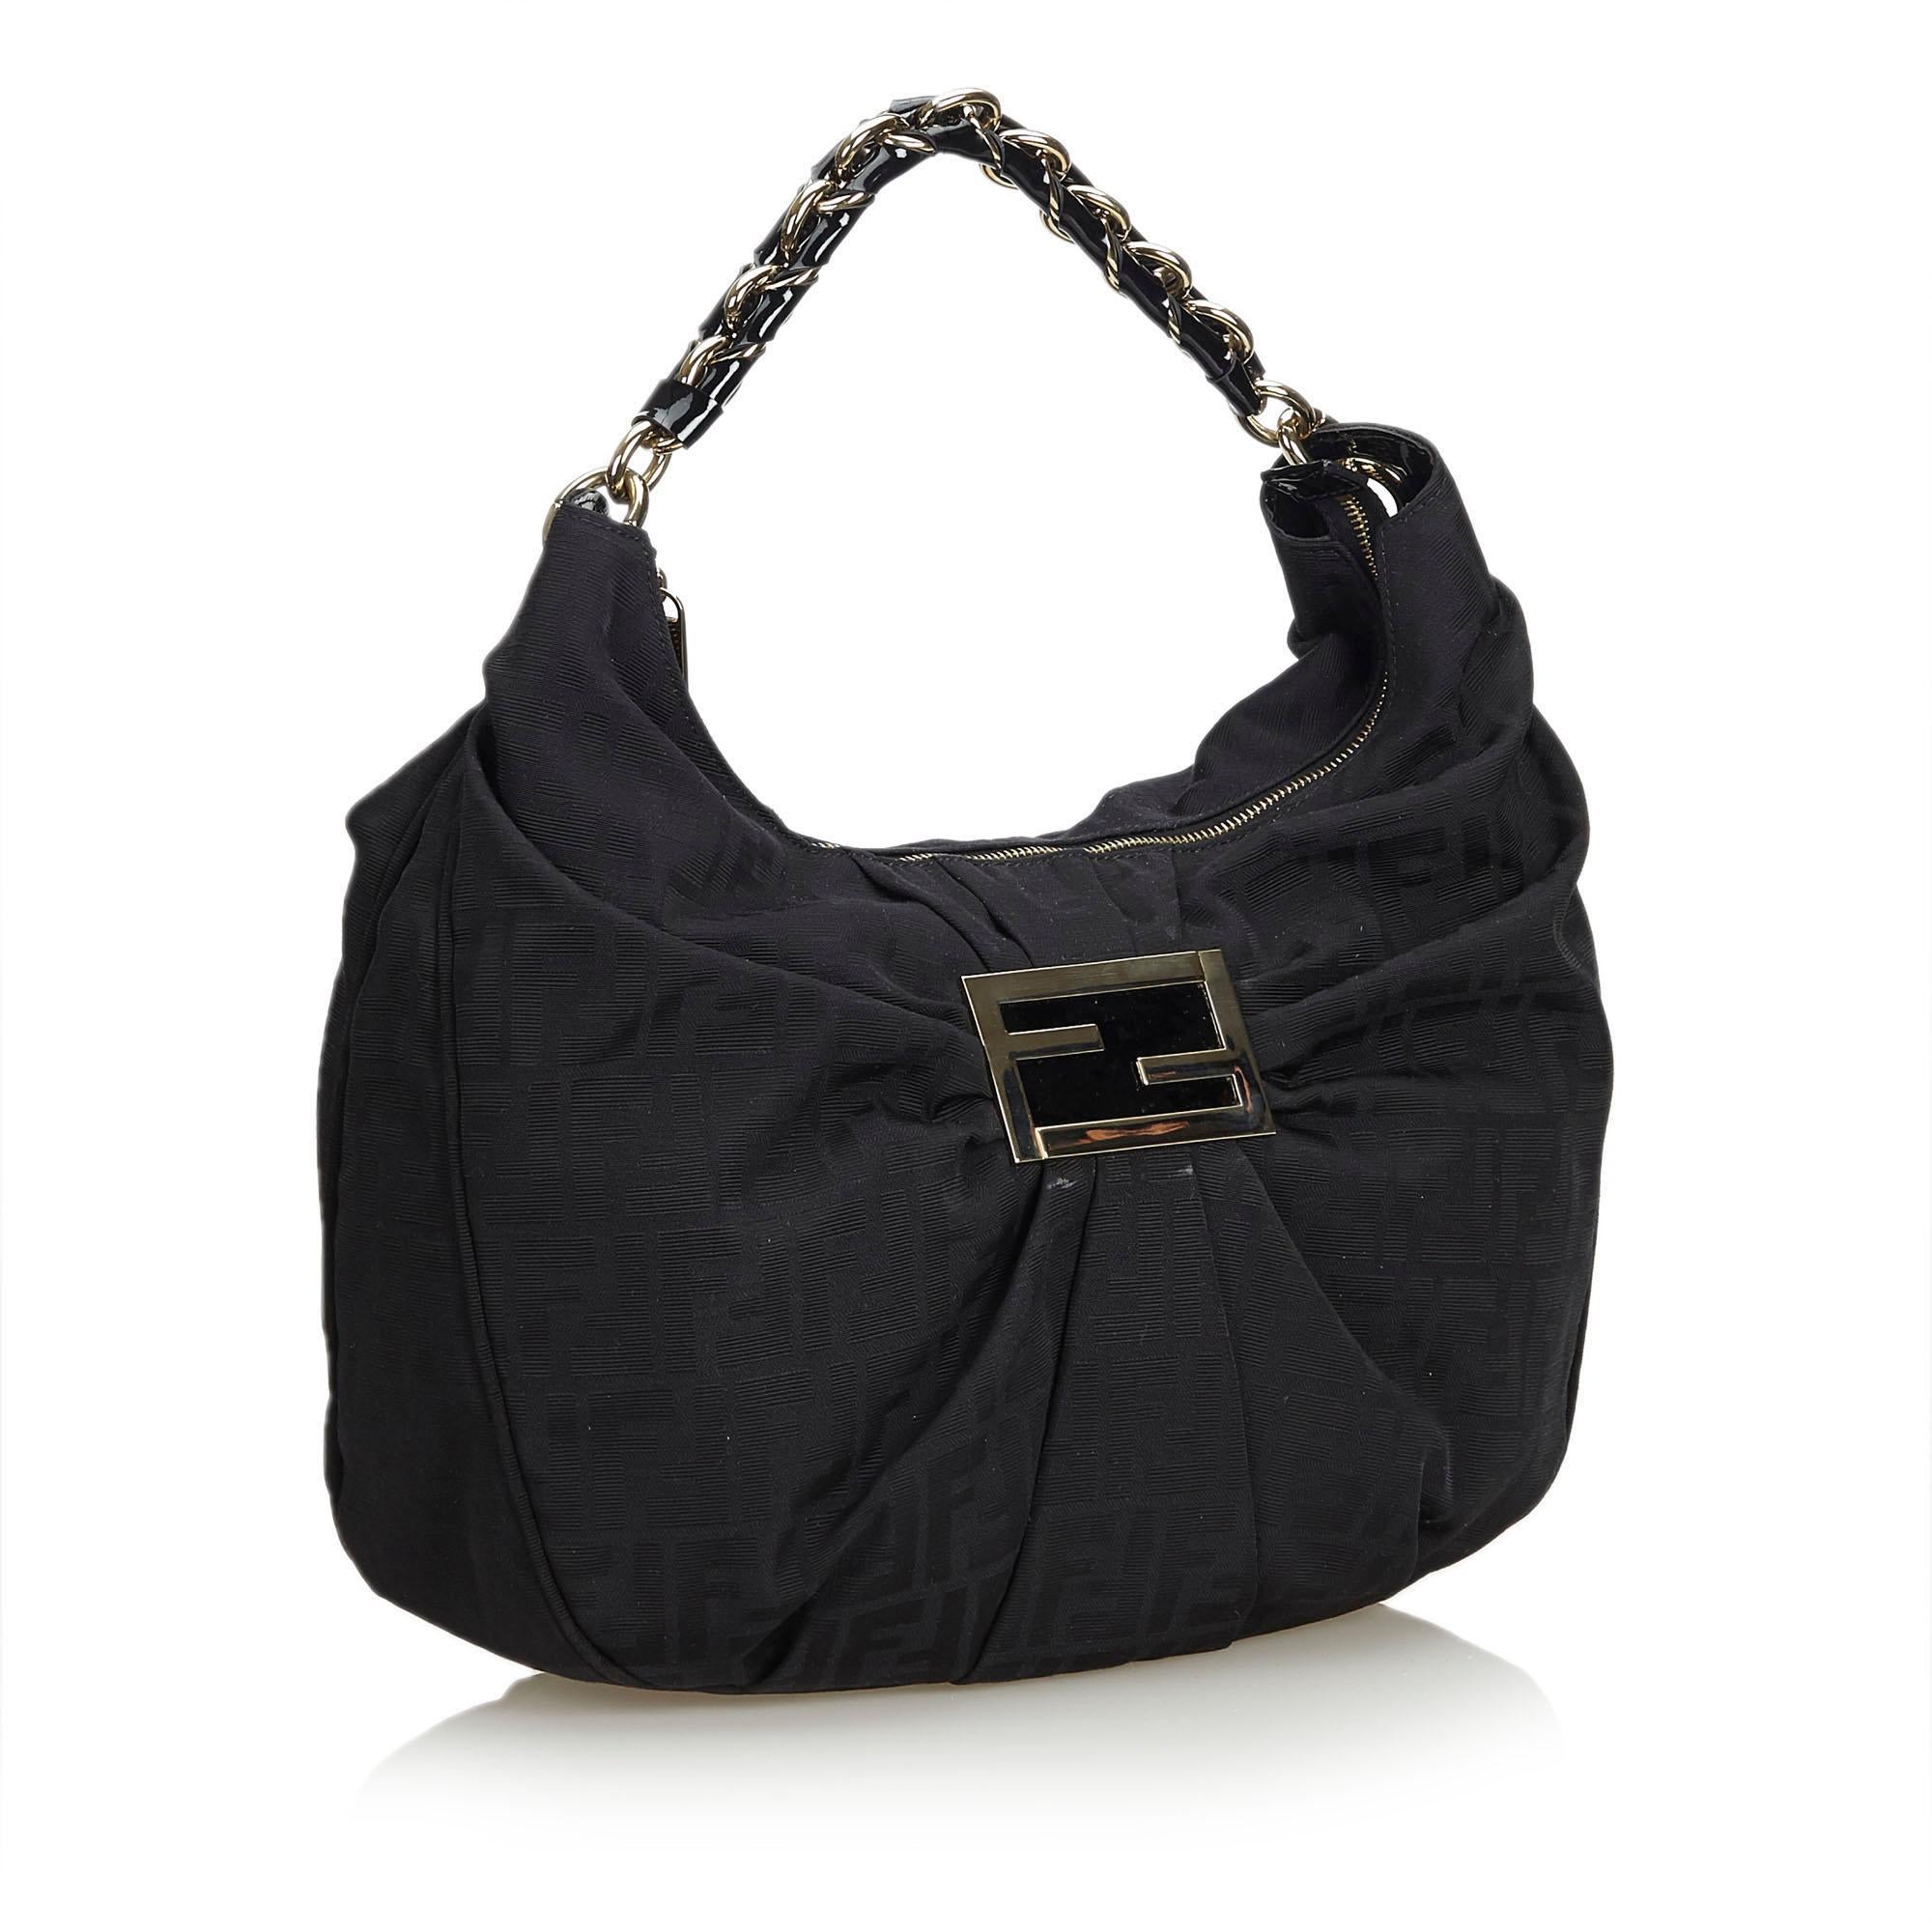 This hobo bag features a canvas body, rolled leather and resin chain strap, a top zip closure, and an interior slip pocket. It carries as AB condition rating.

Inclusions: 
This item does not come with inclusions.

Dimensions:
Length: 27.00